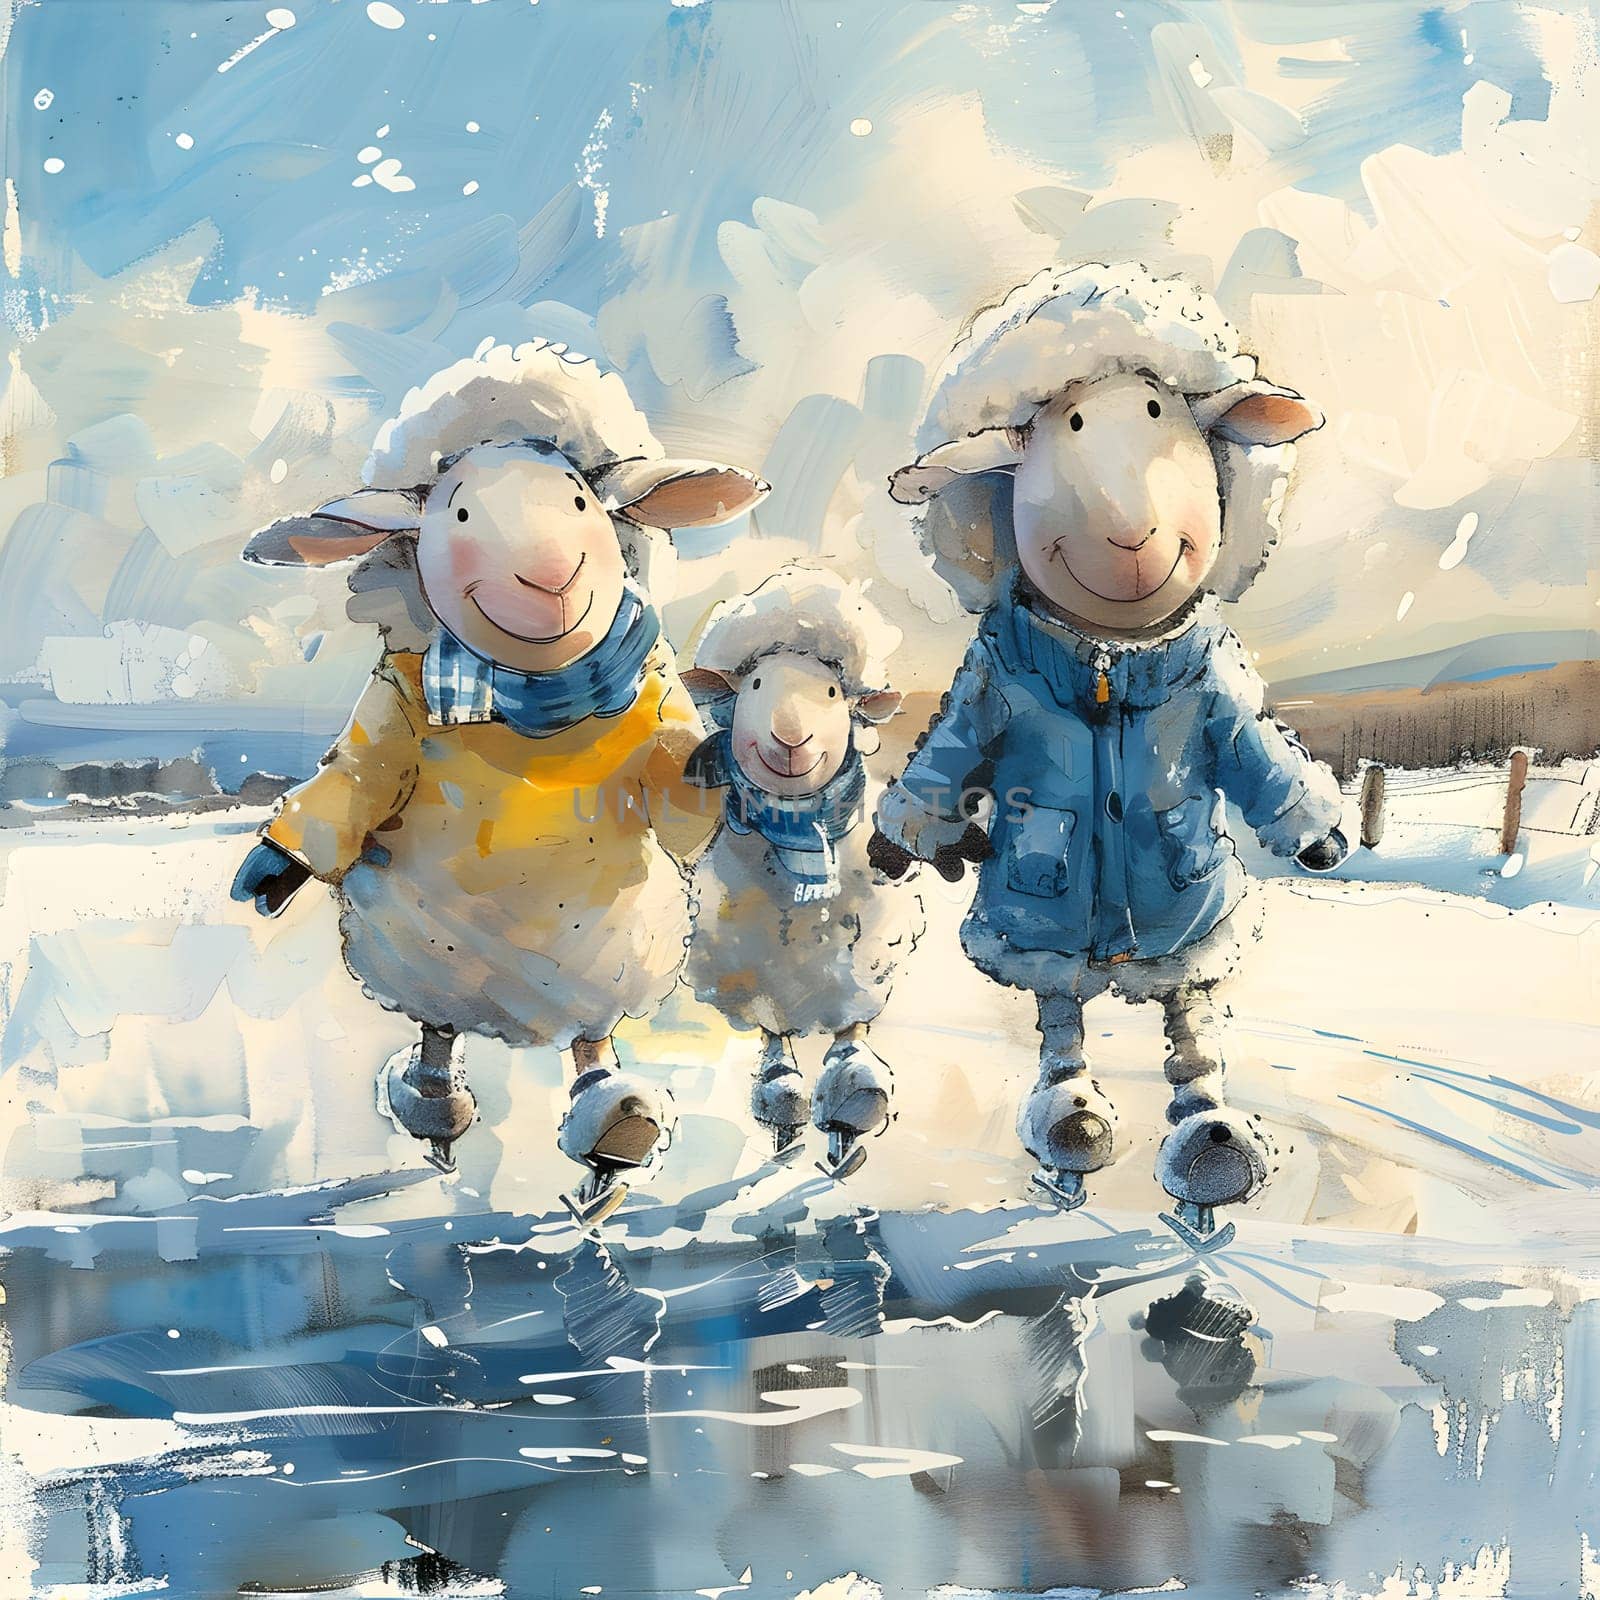 Three sheep having a fun day ice skating in a snowy painting by Nadtochiy